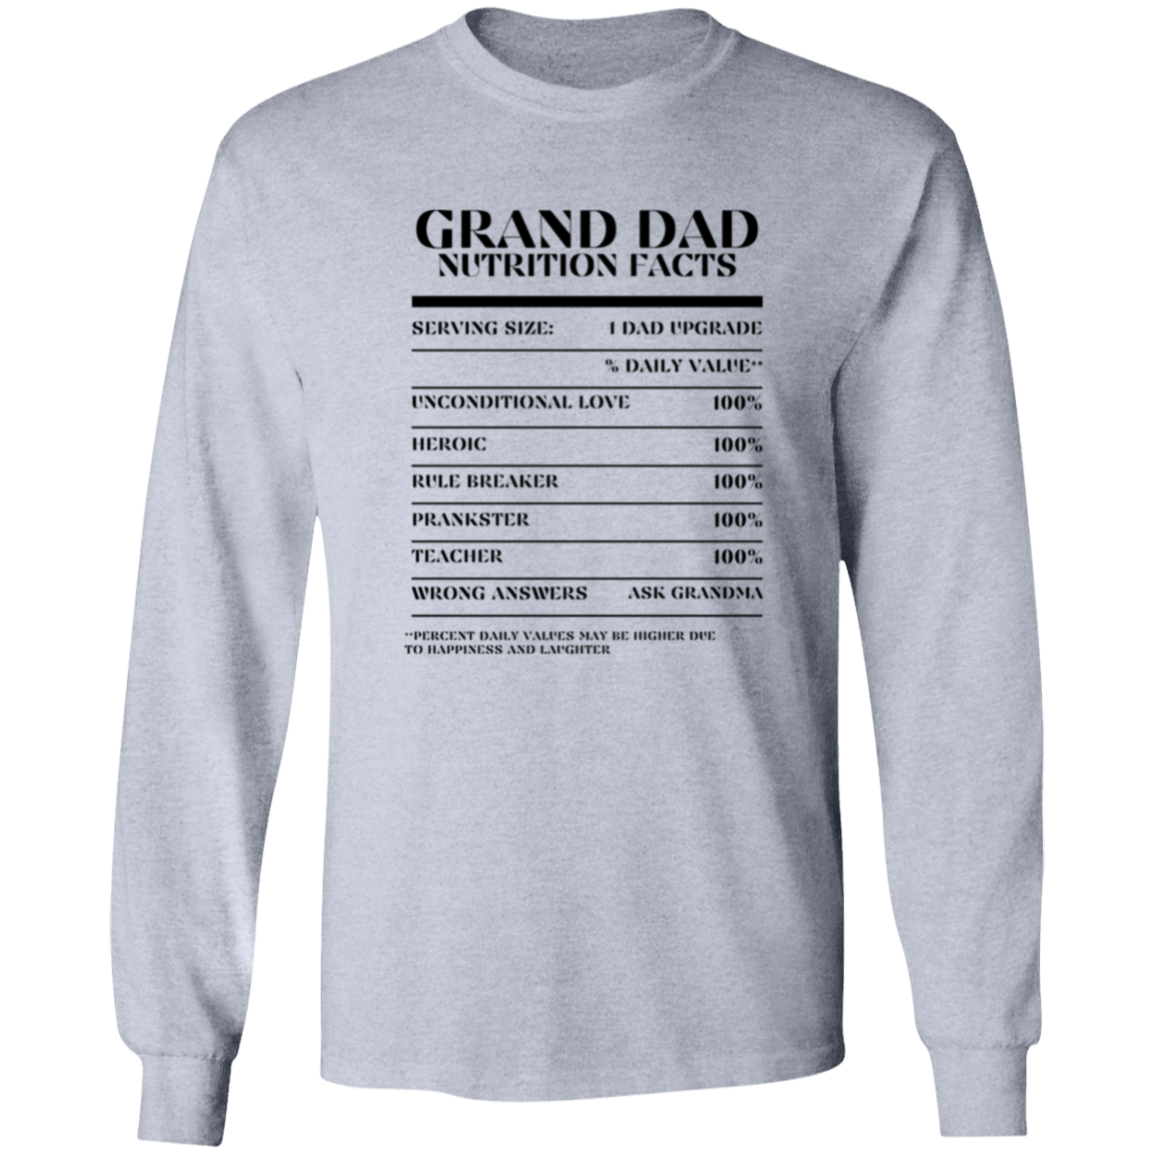 Nutrition Facts T-Shirt LS - Grand Dad - Black